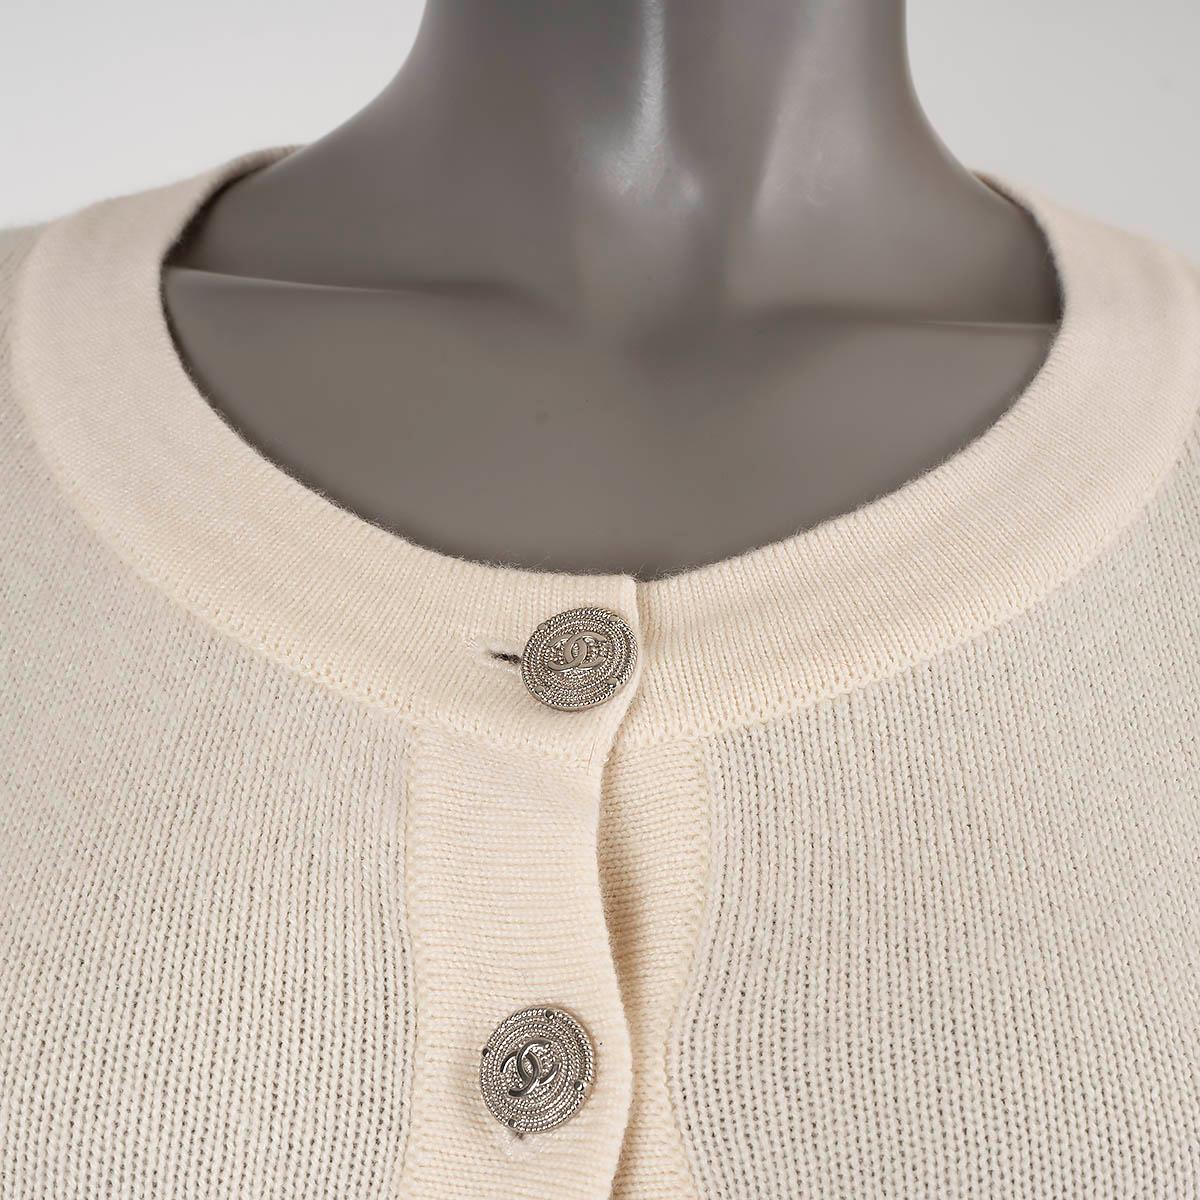 CHANEL cream cashmere 2012 12C FLORAL BEADED Cardigan Sweater 36 XS For Sale 2